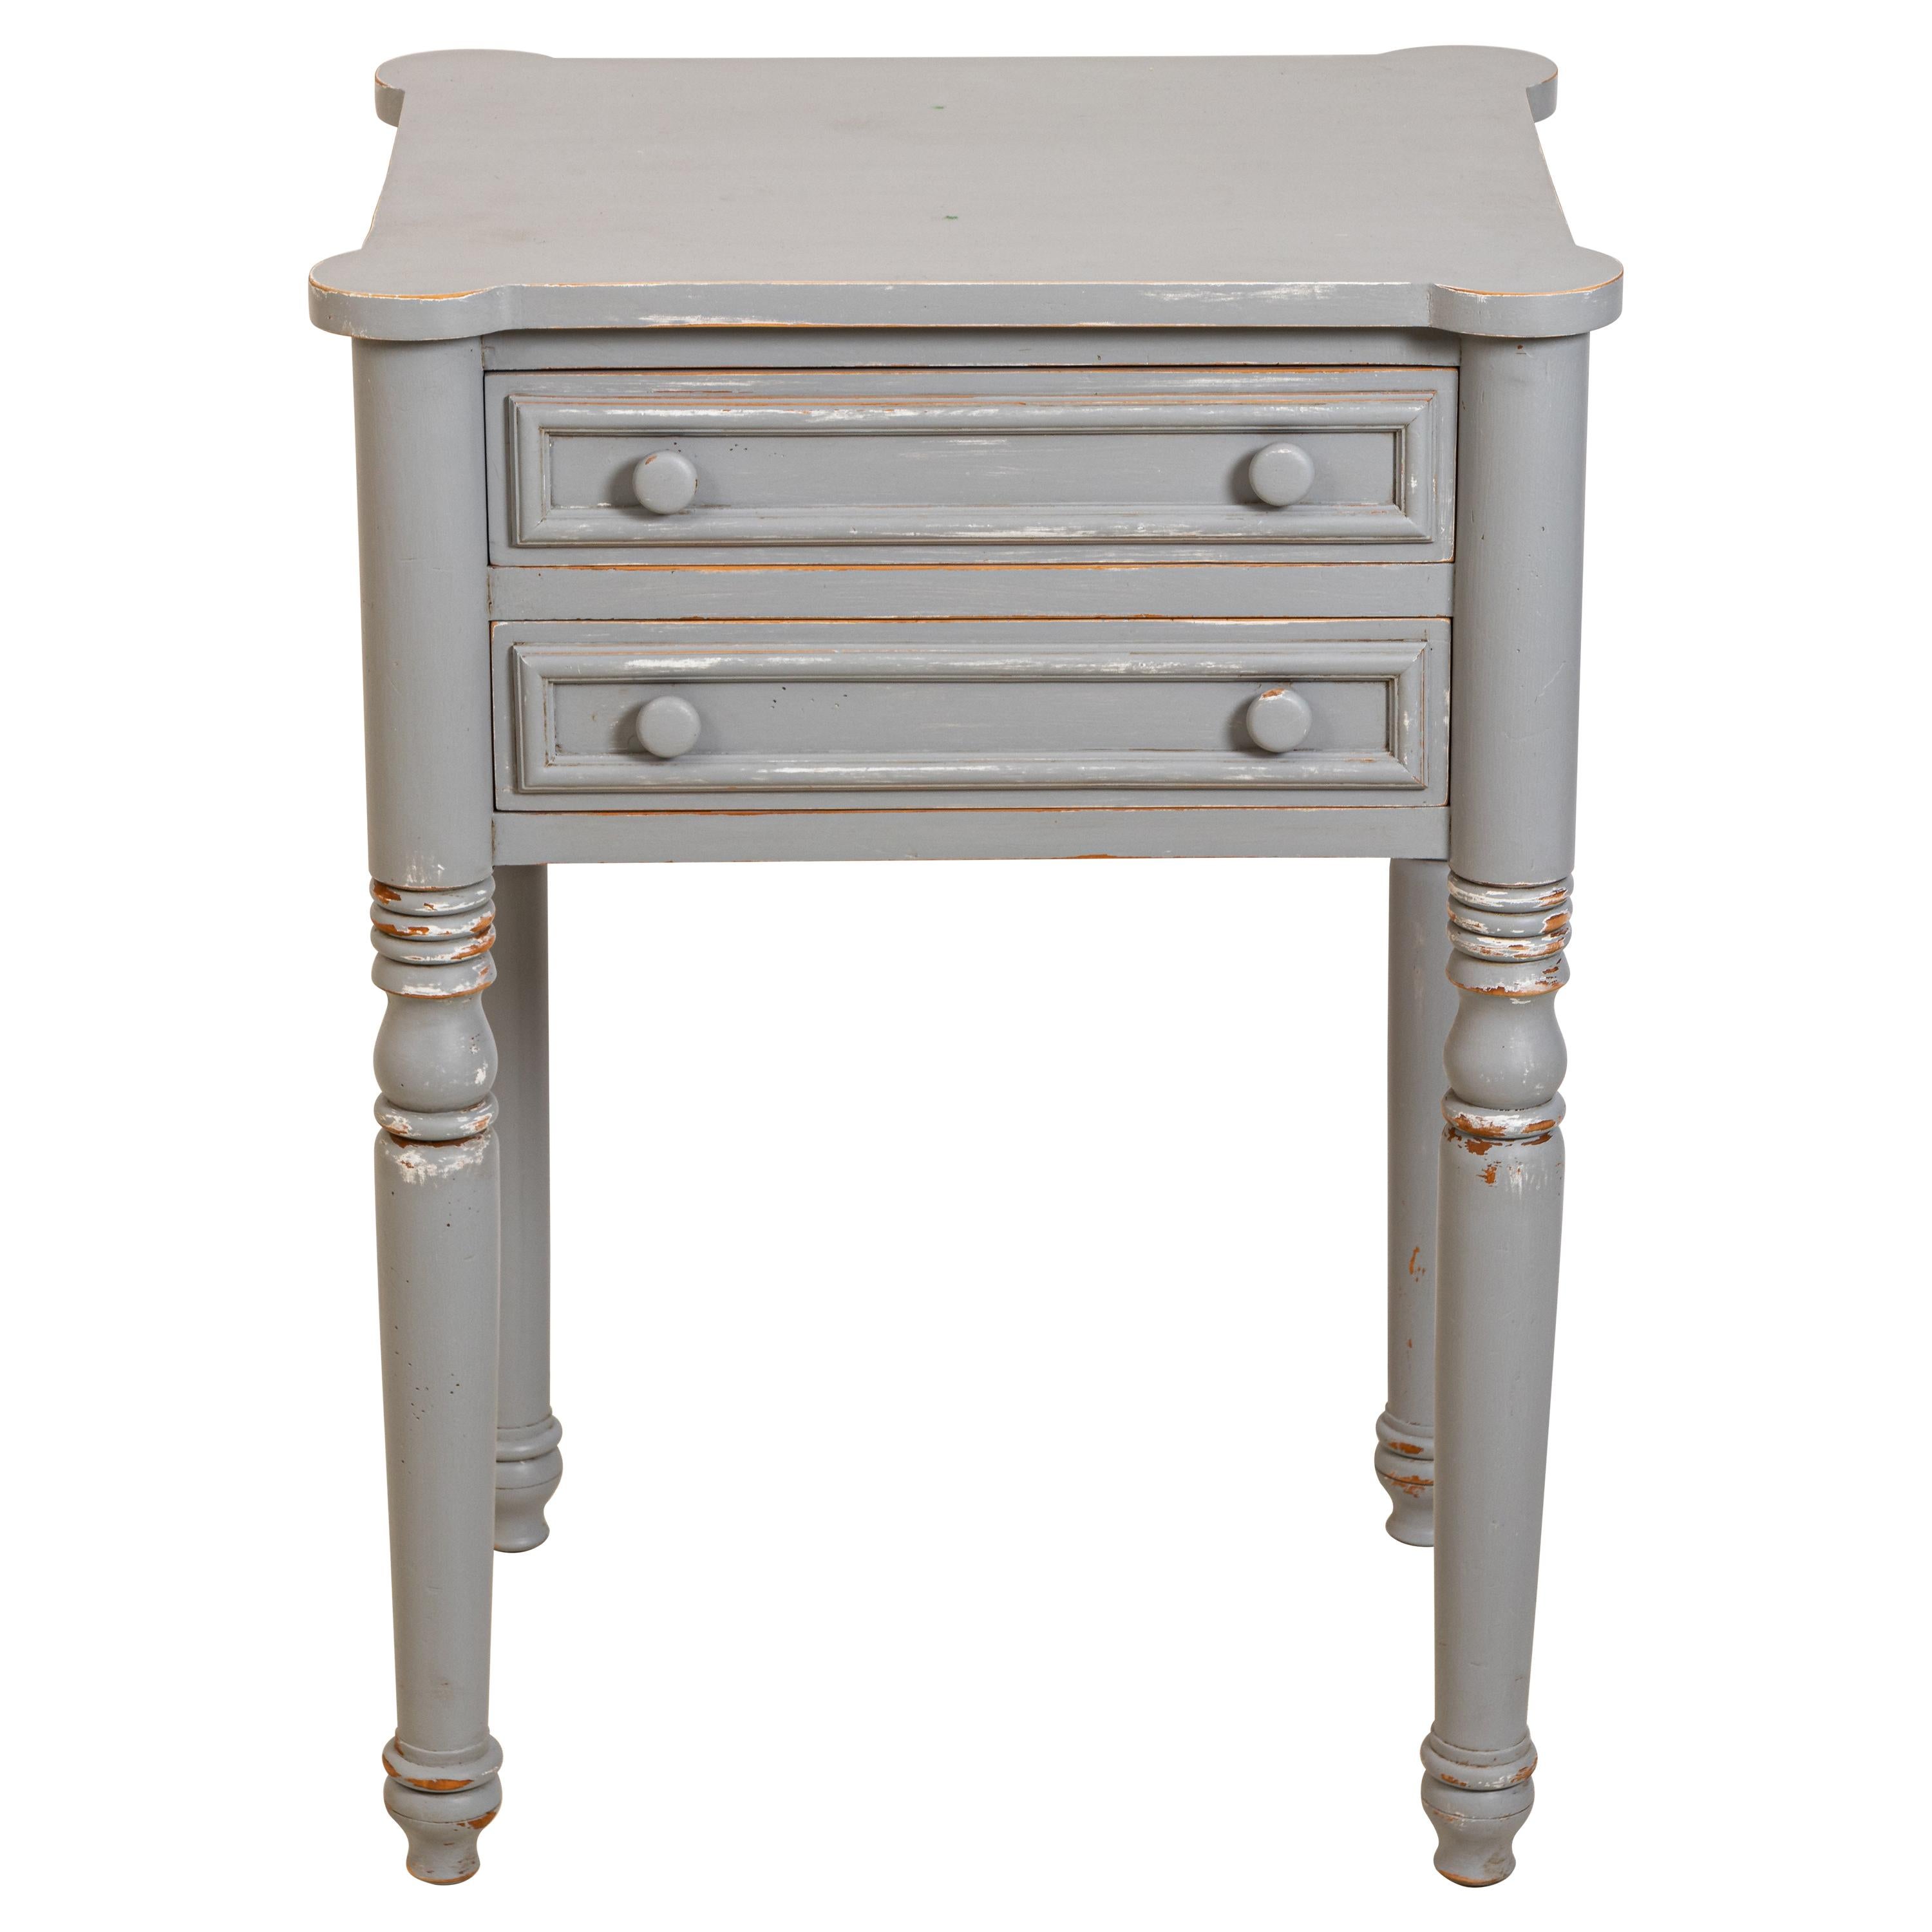 Two-Drawer Painted Distressed Table